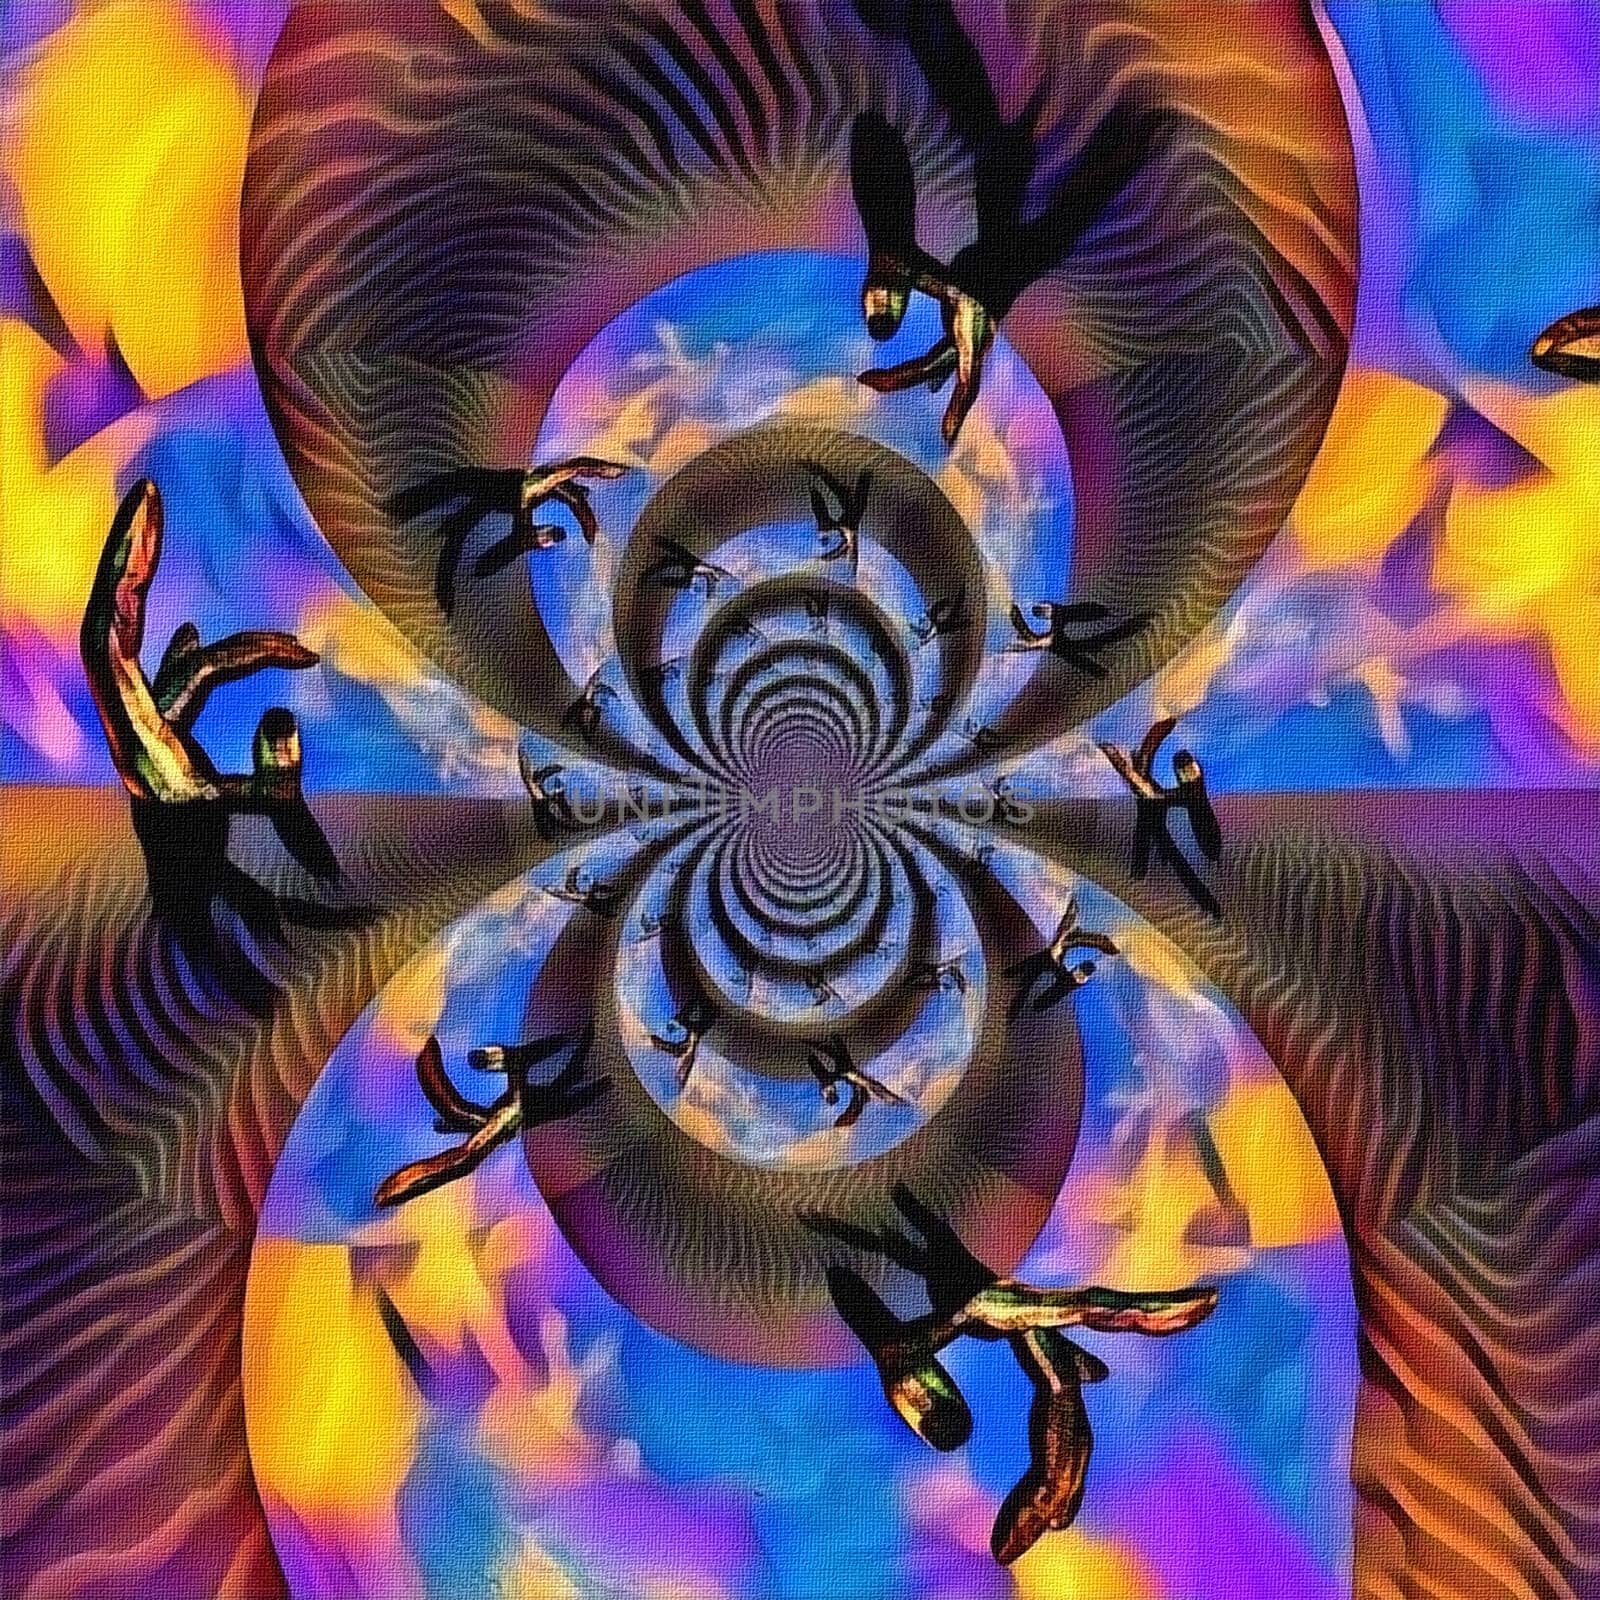 Abstract painting. Mirrored round fractal with God's hands.